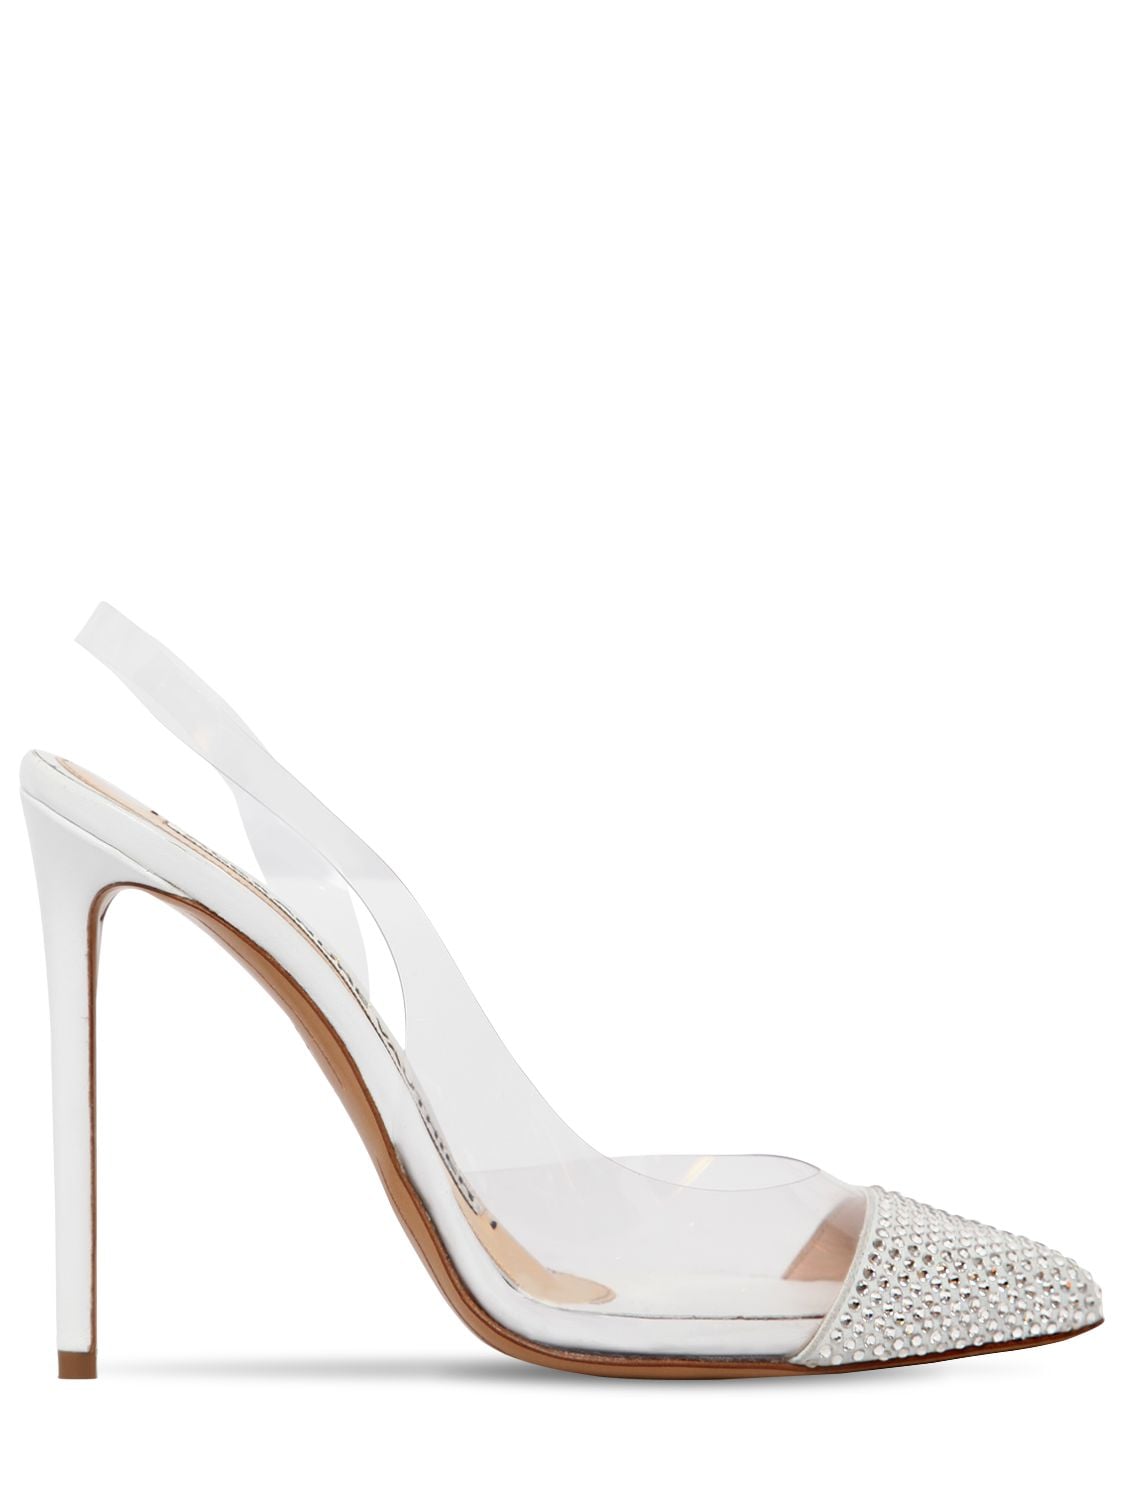 ALEXANDRE VAUTHIER 110MM AMBER GHOST CRYSTAL PVC PUMPS,69IVZ7001-UFZDK1DIVE5BUA2